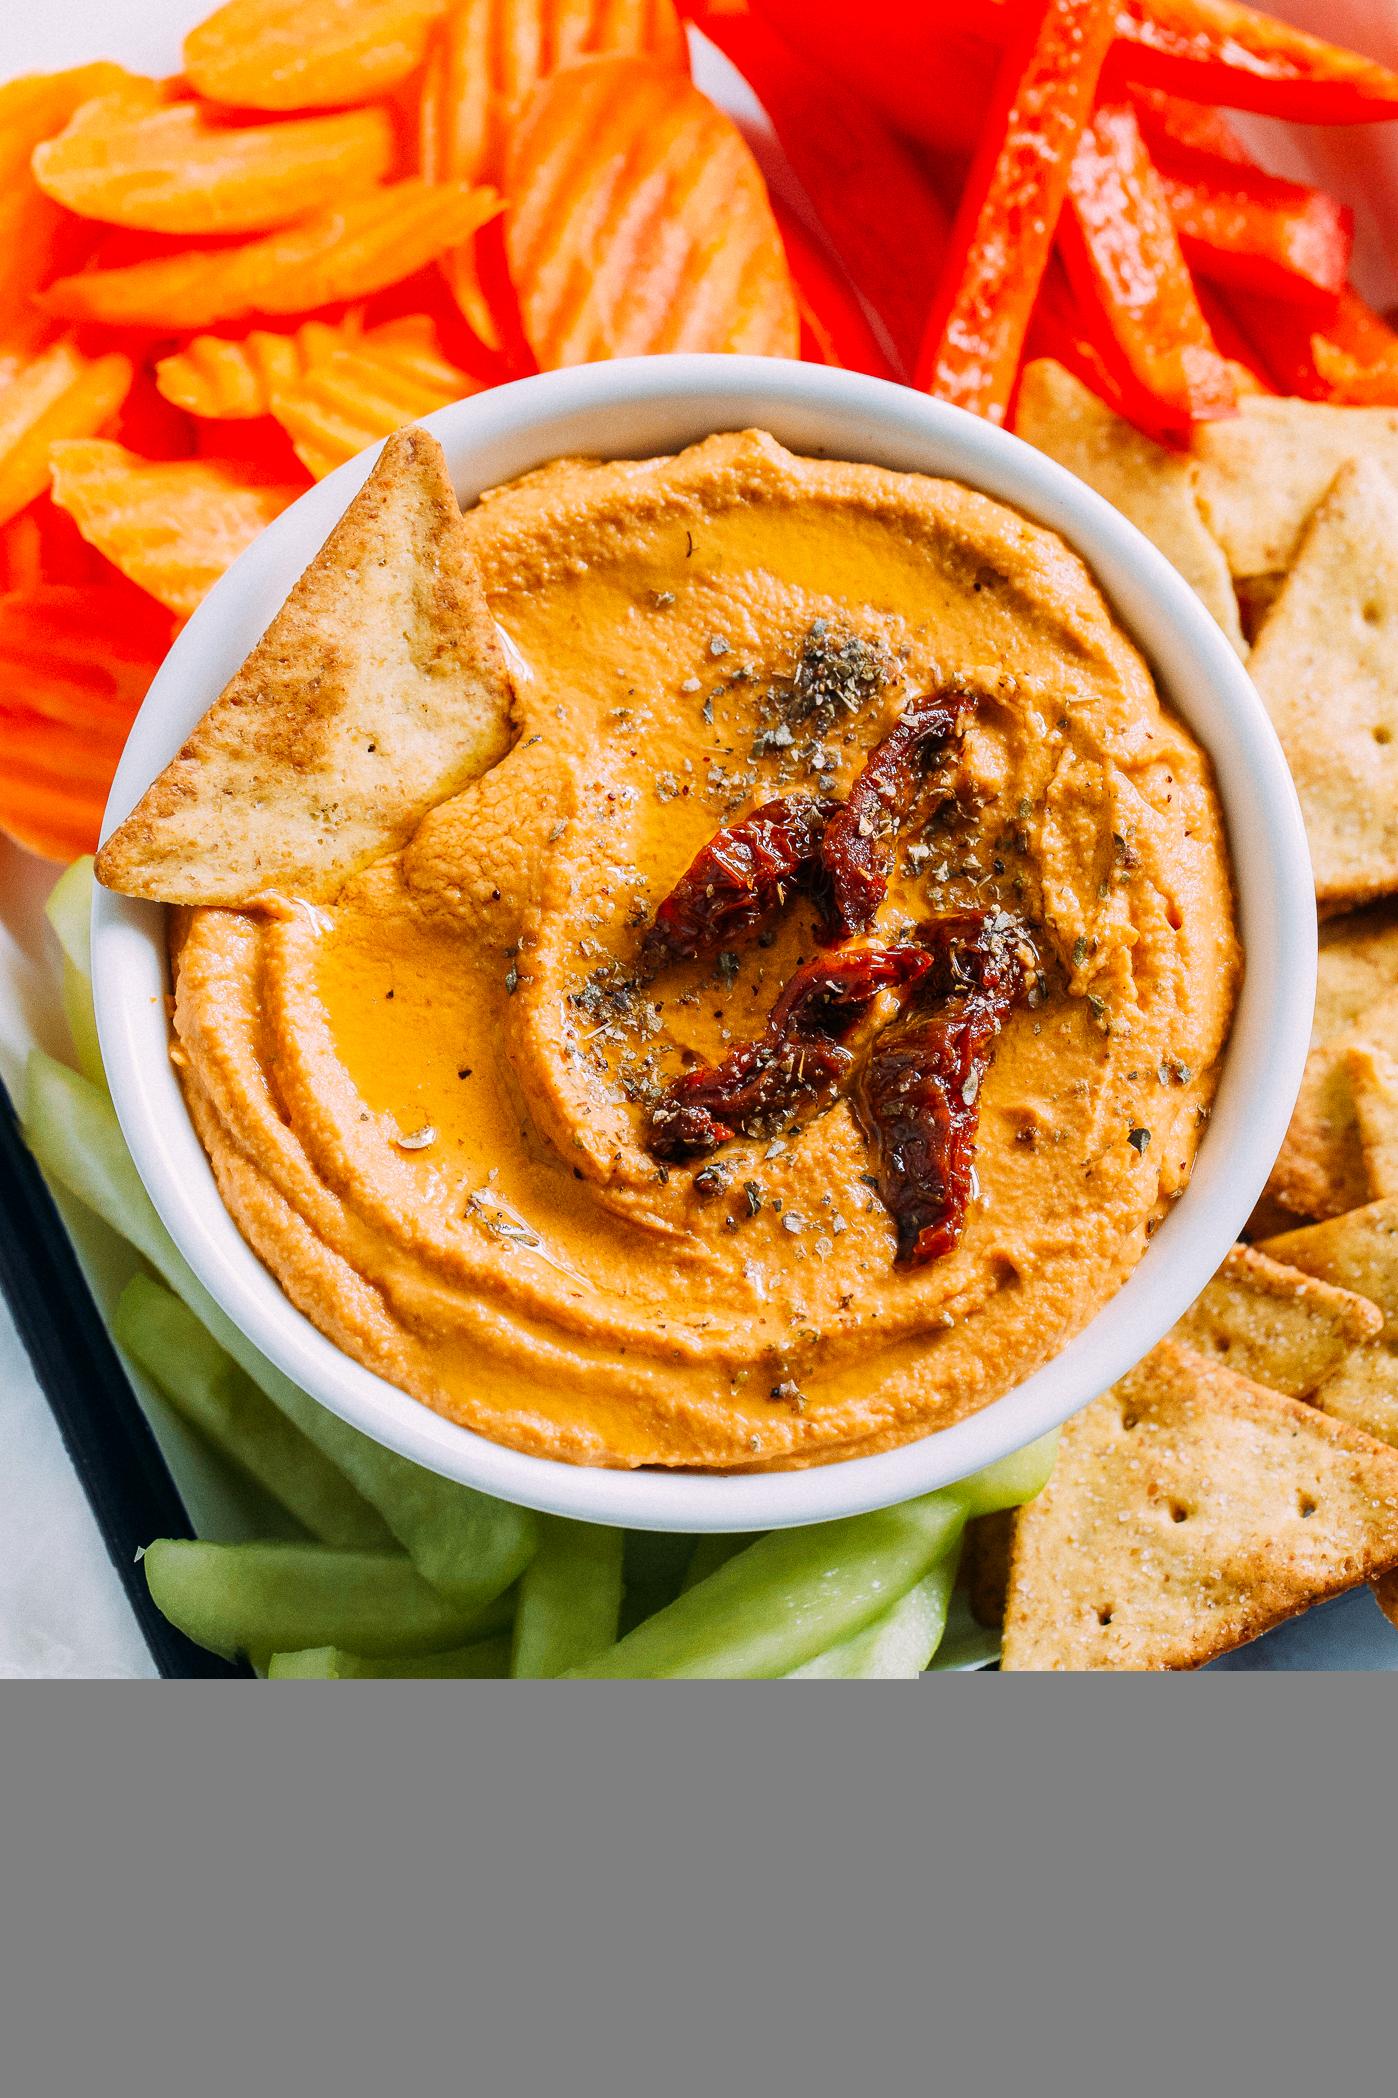  The bright-orange hue of this hummus reminds us of a stunning summer sunrise.